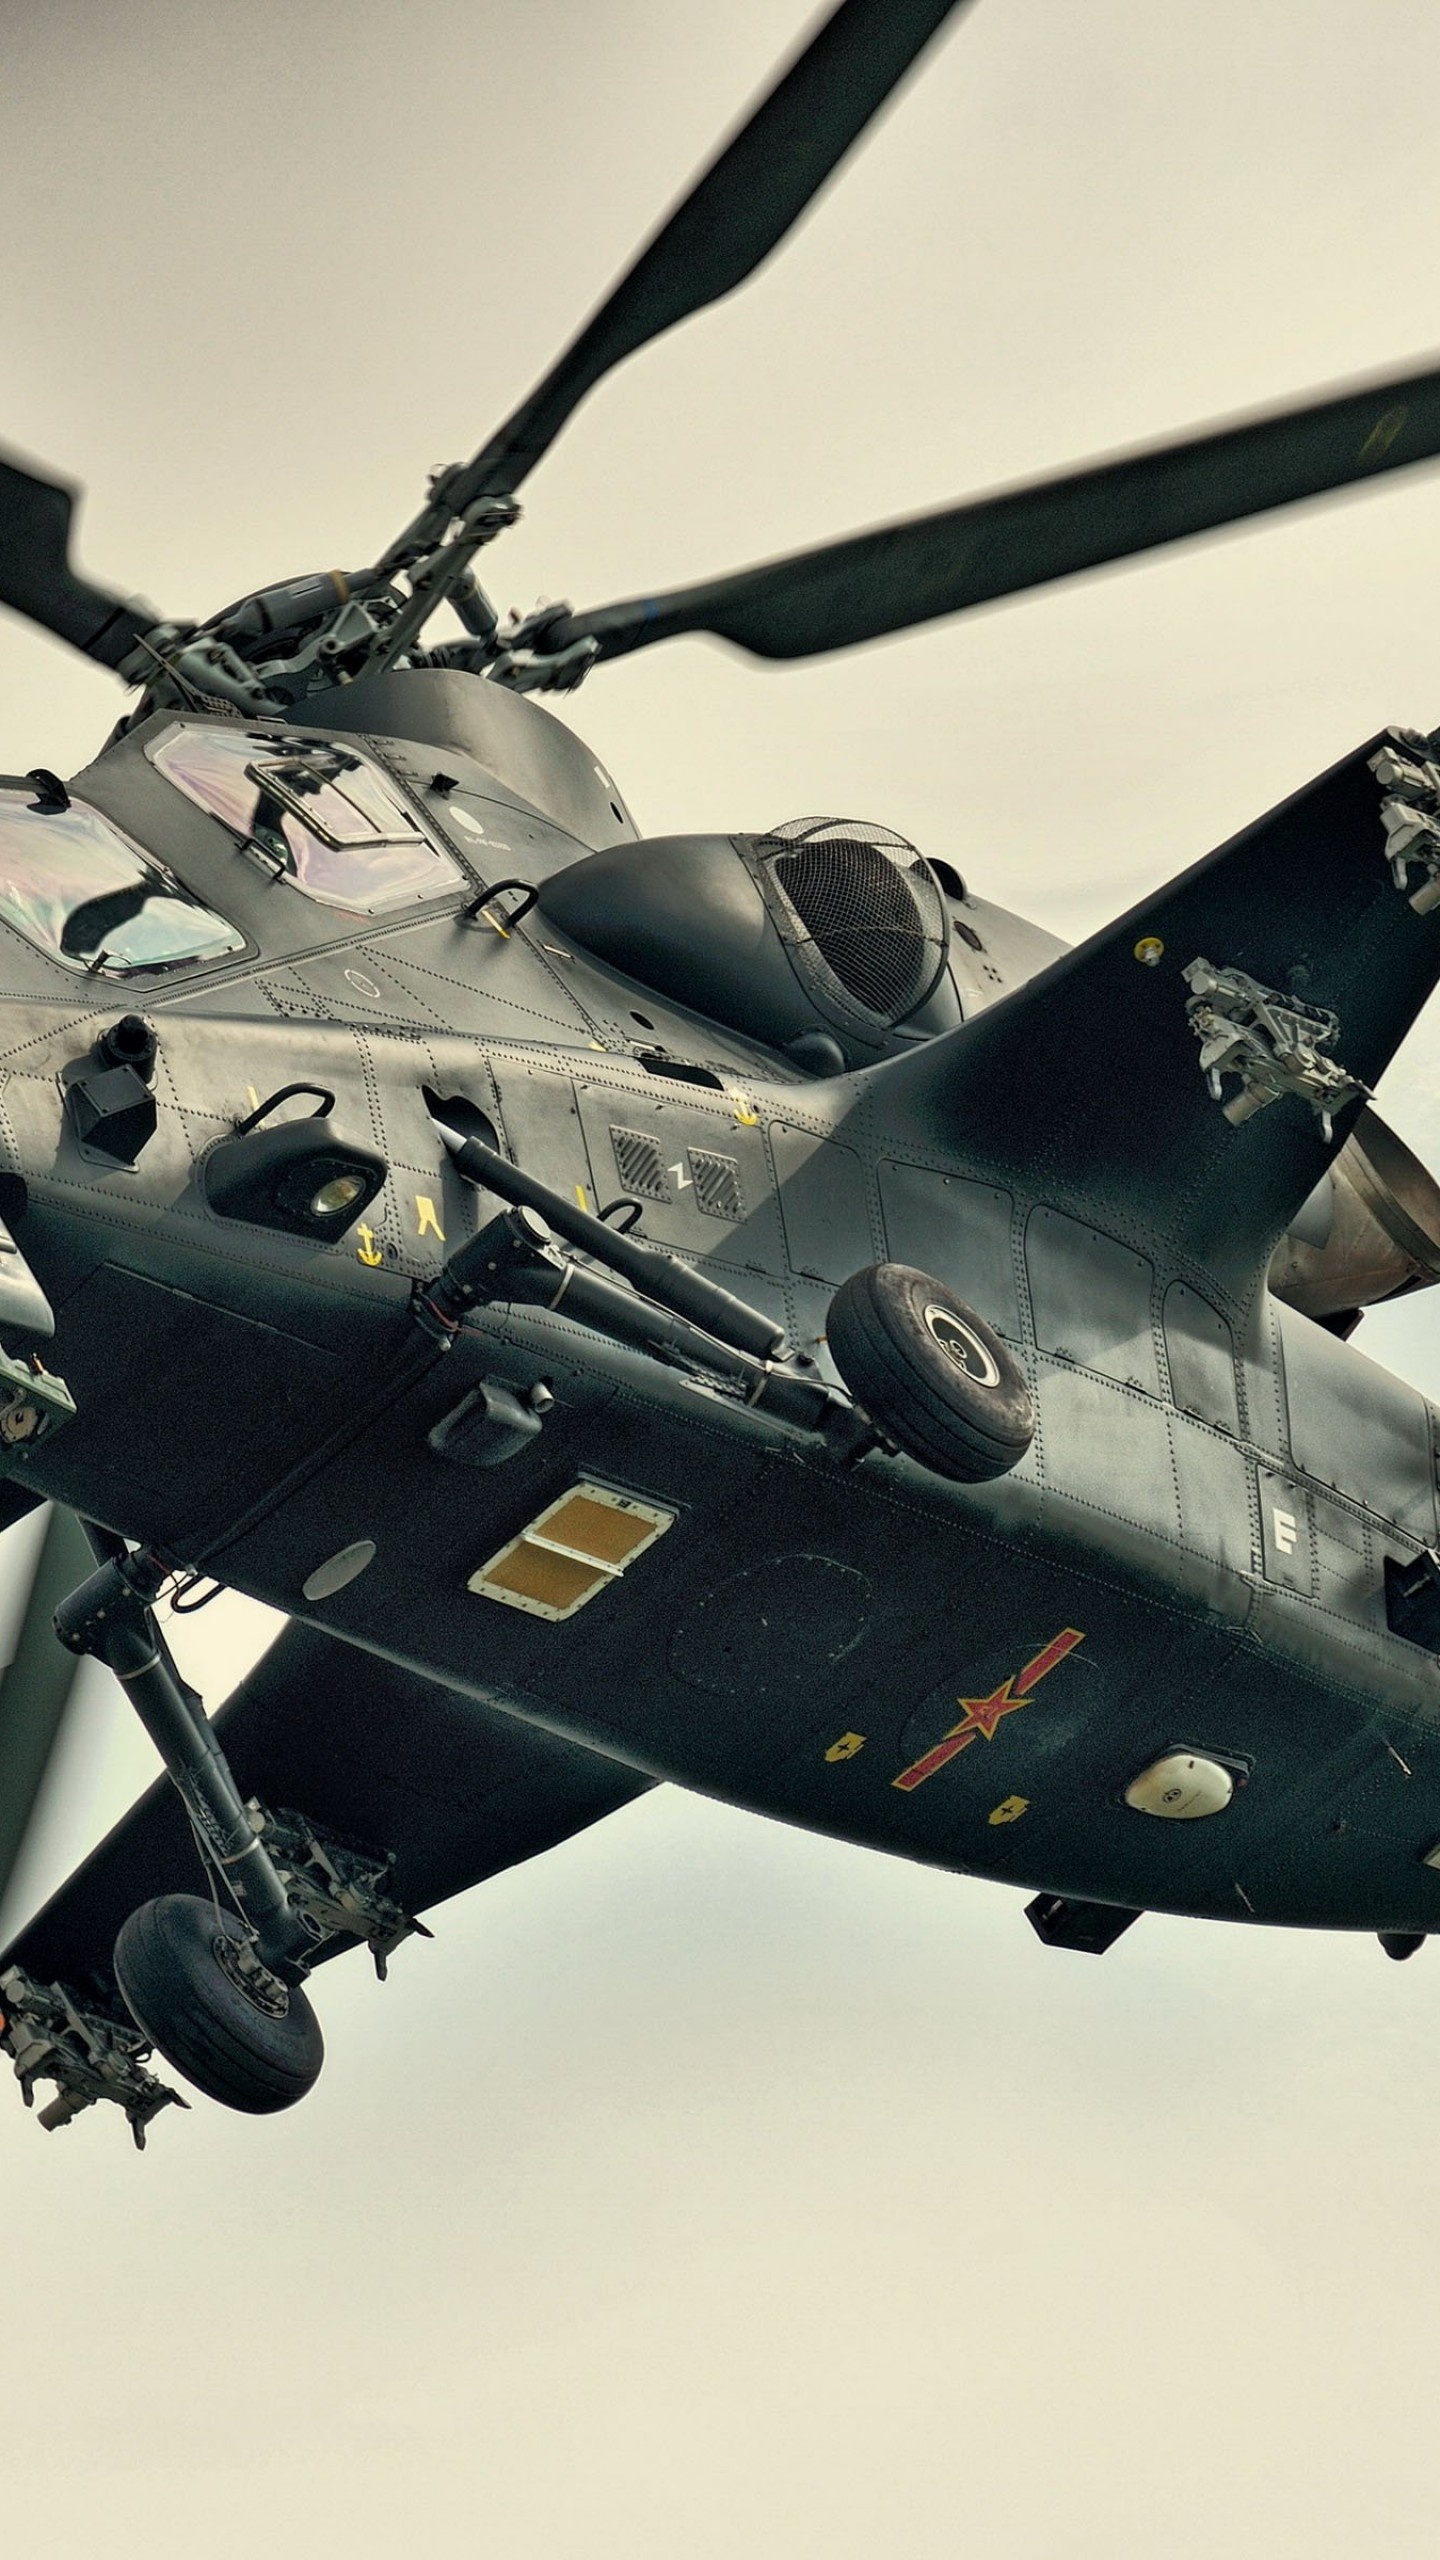 CAIC WZ-10, Fierce thunderbolt, Air Force attack helicopter, Peoples liberation army, 1440x2560 HD Handy